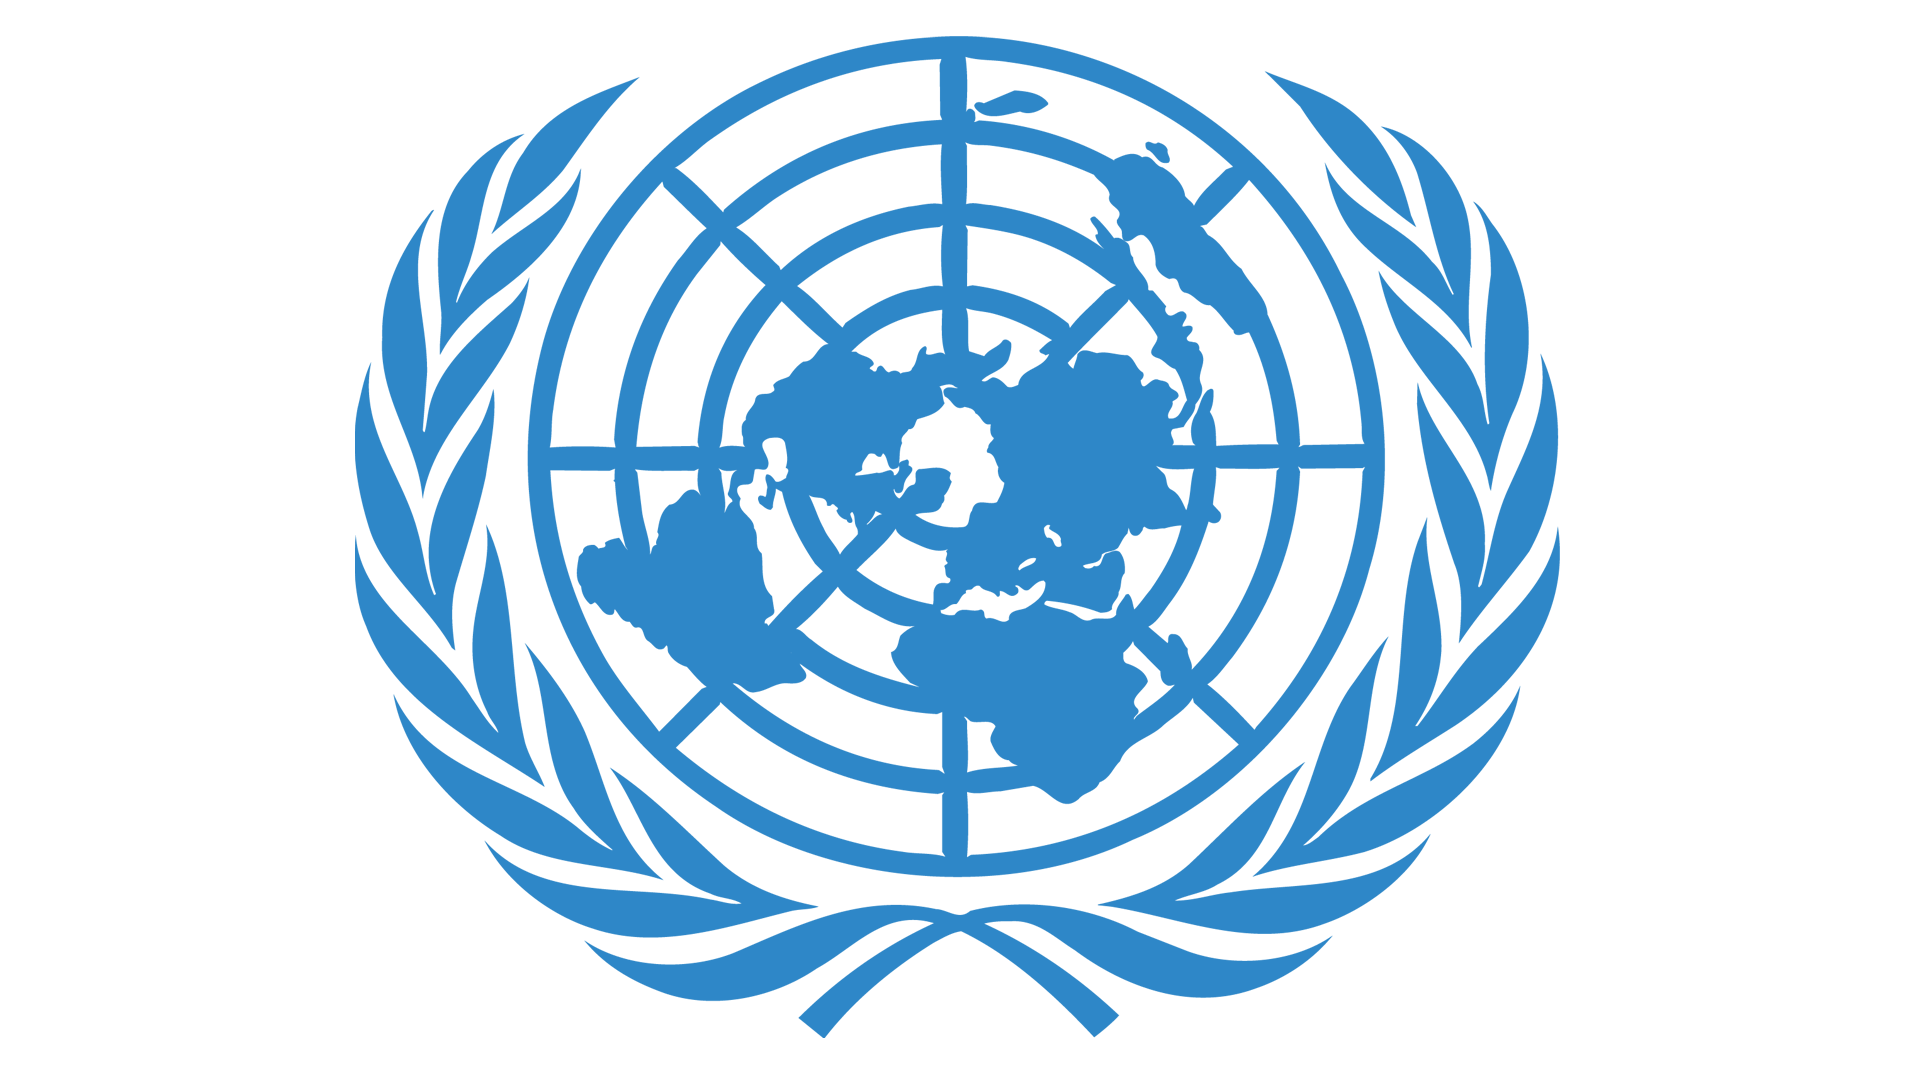 United Nations Logo - United Nations Logo, United Nations Symbol, Meaning, History and ...